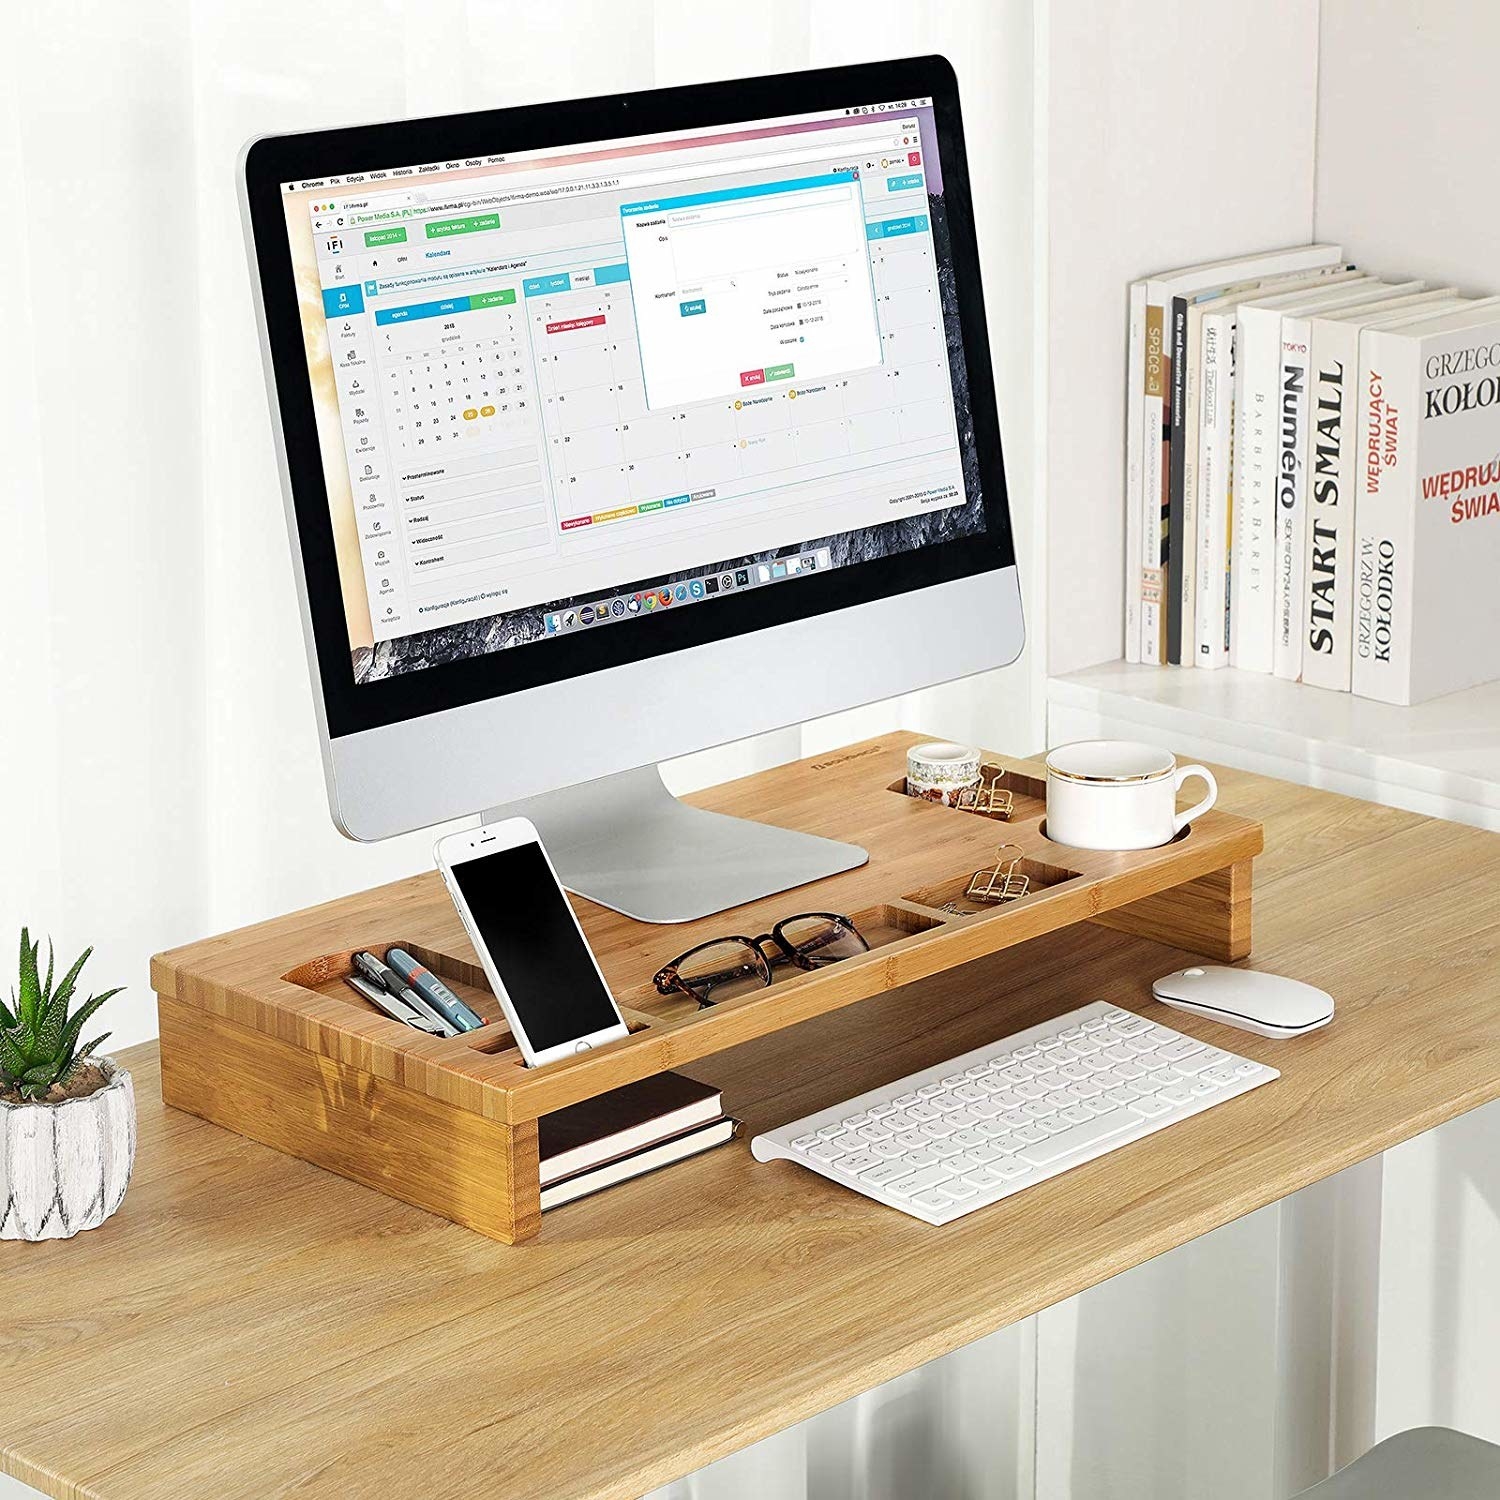 13. Monitor Office Supplies